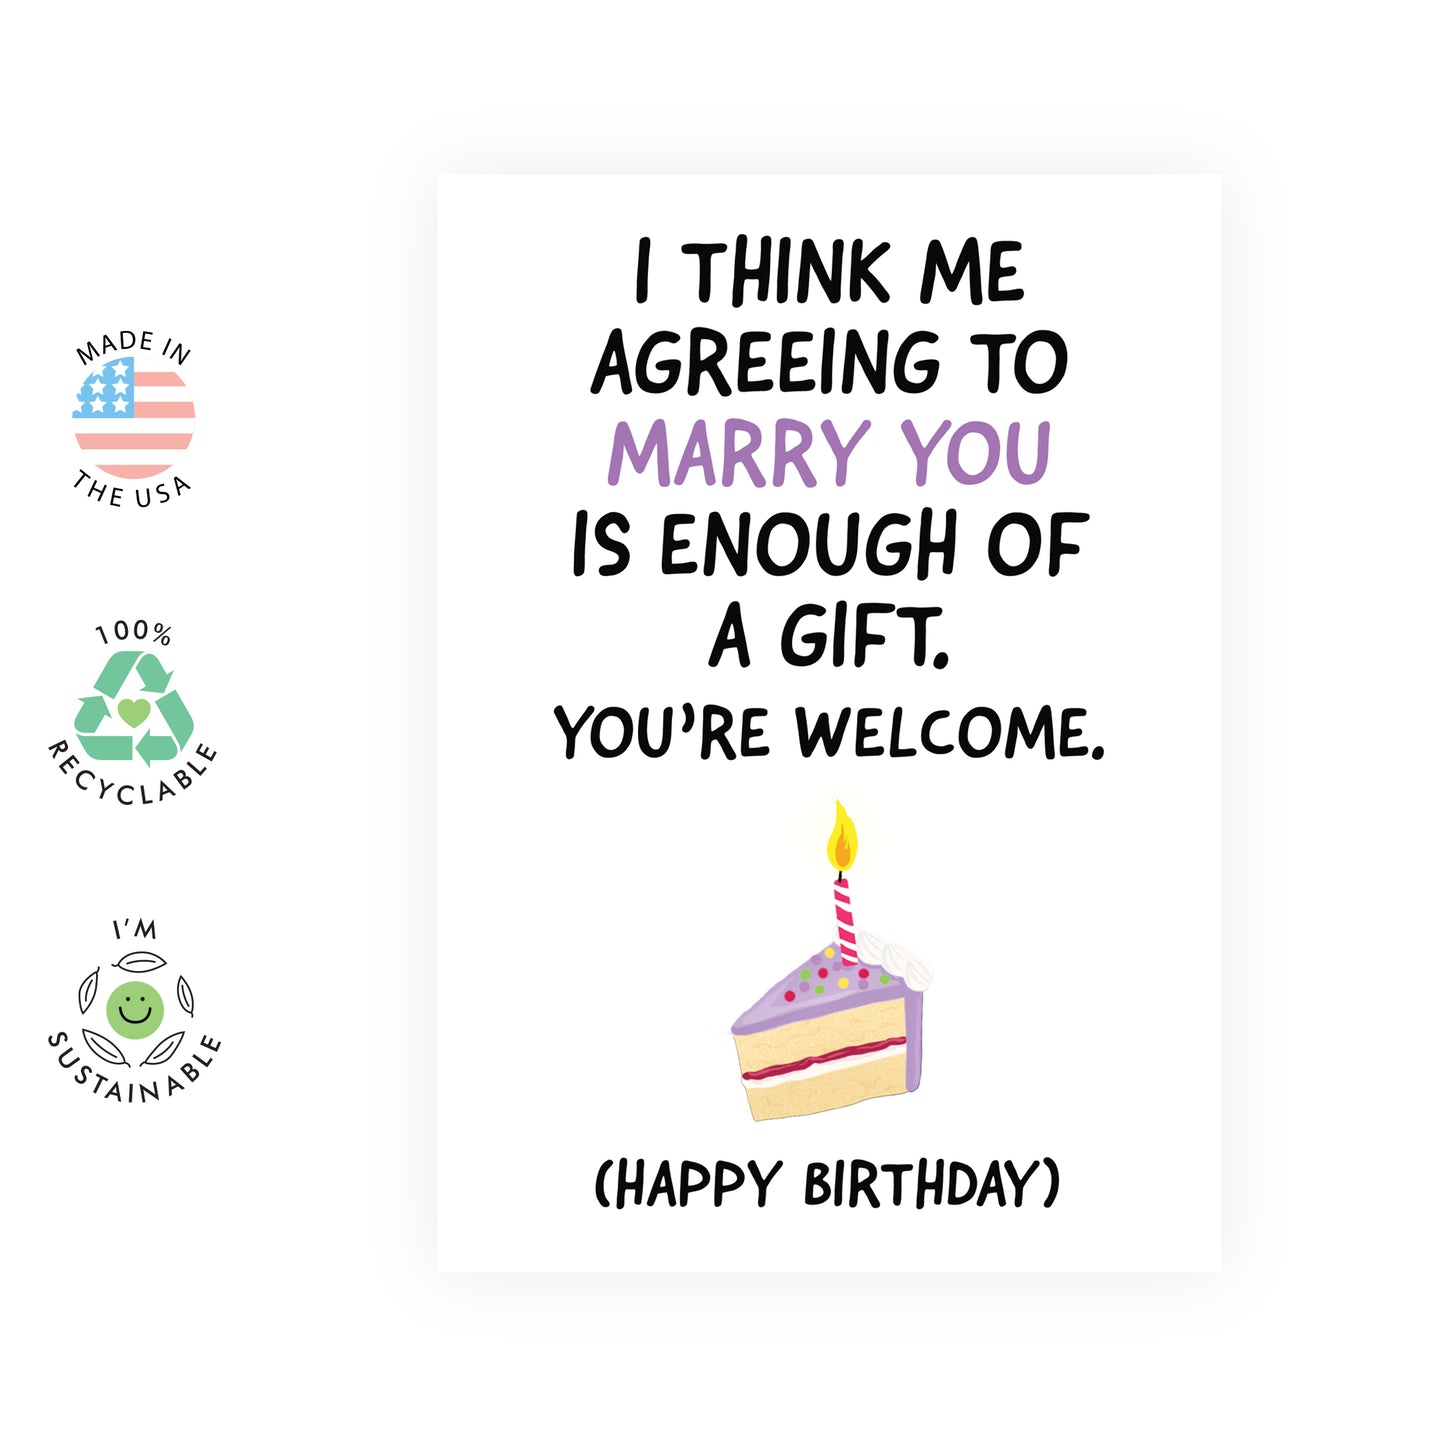 Funny Birthday Card - Agreeing To Marry You - For Men Women